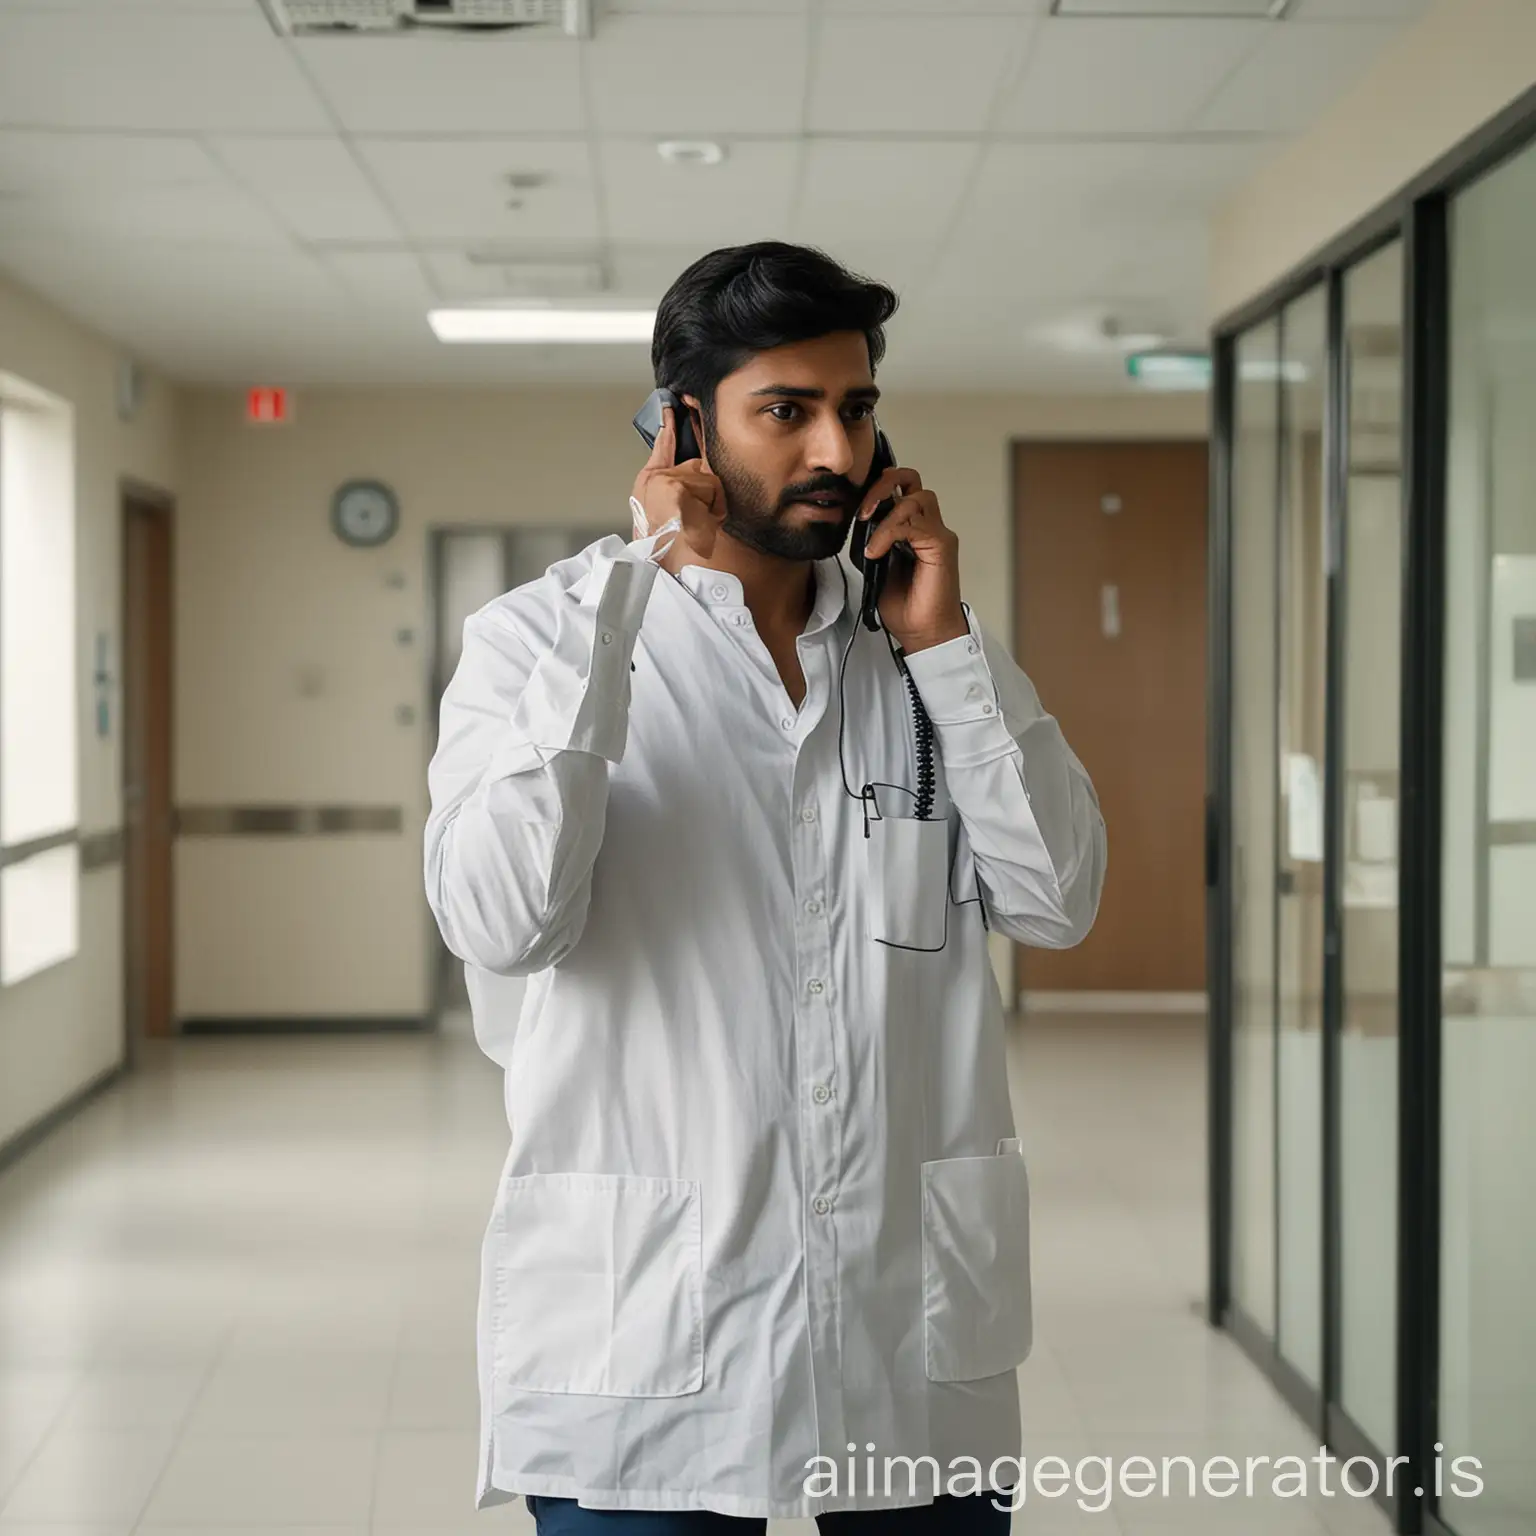 Indian person talking on phone with an agent. Standing inside a hospital. Create same person reading a document in tension and seriously